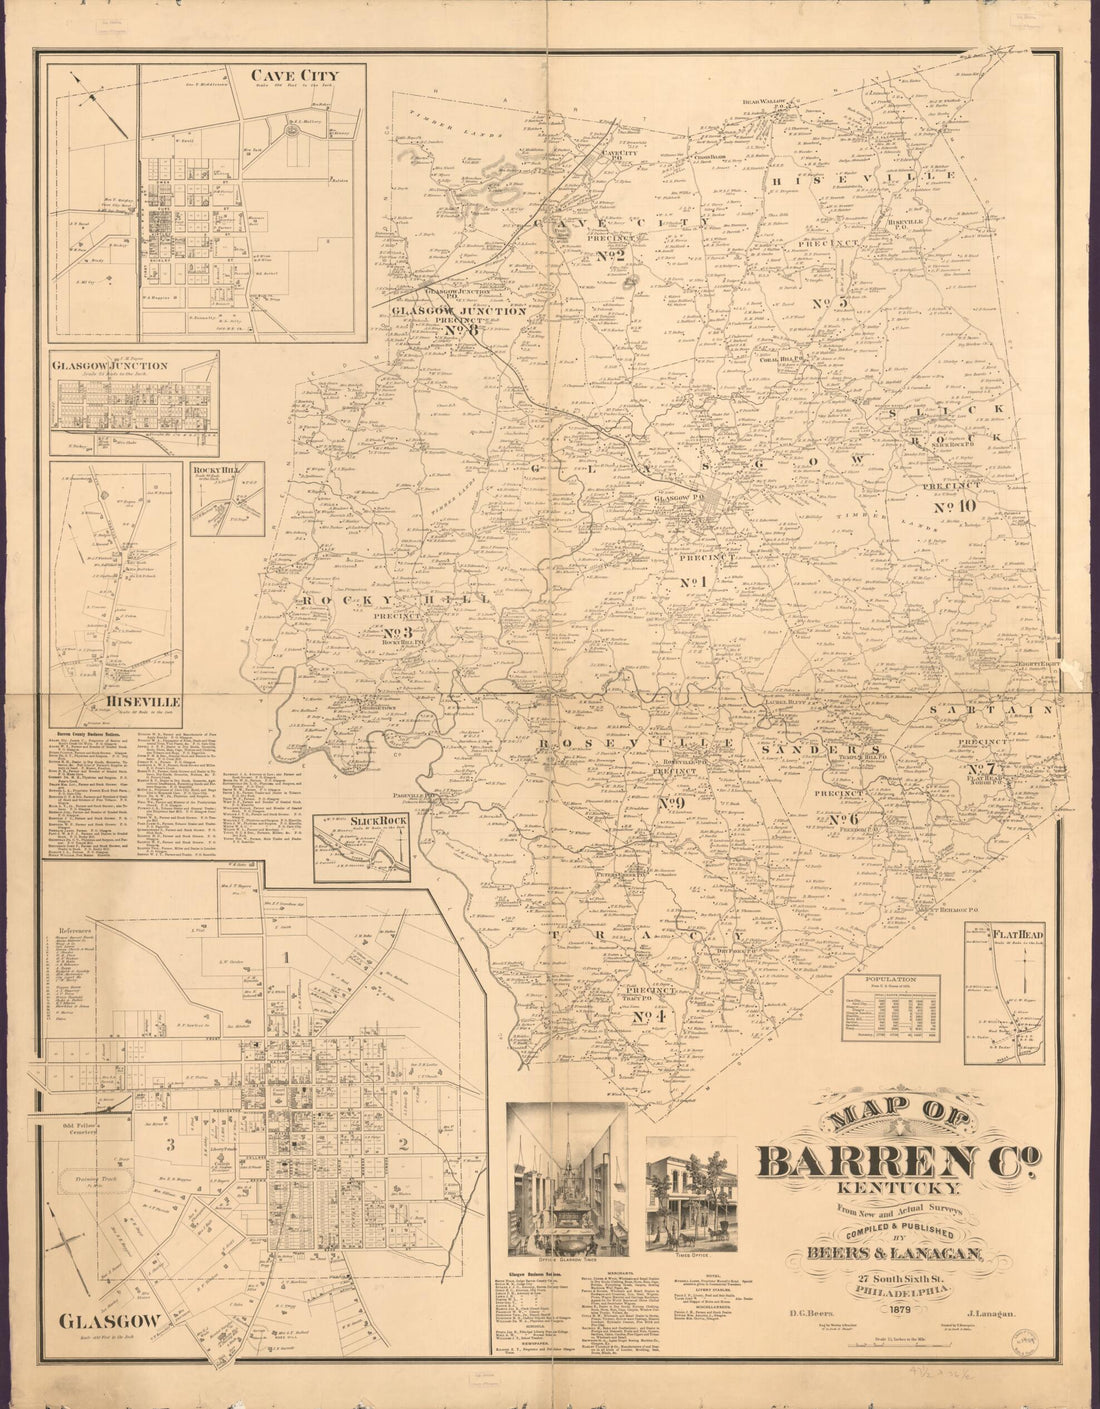 This old map of Map of Barren Co., Kentucky (Map of Barren County, Kentucky) from 1879 was created by D. G. (Daniel G.) Beers, F. (Frederick) Bourquin,  D.G. Beers &amp; Co, J. Lanagan,  Worley &amp; Bracher in 1879